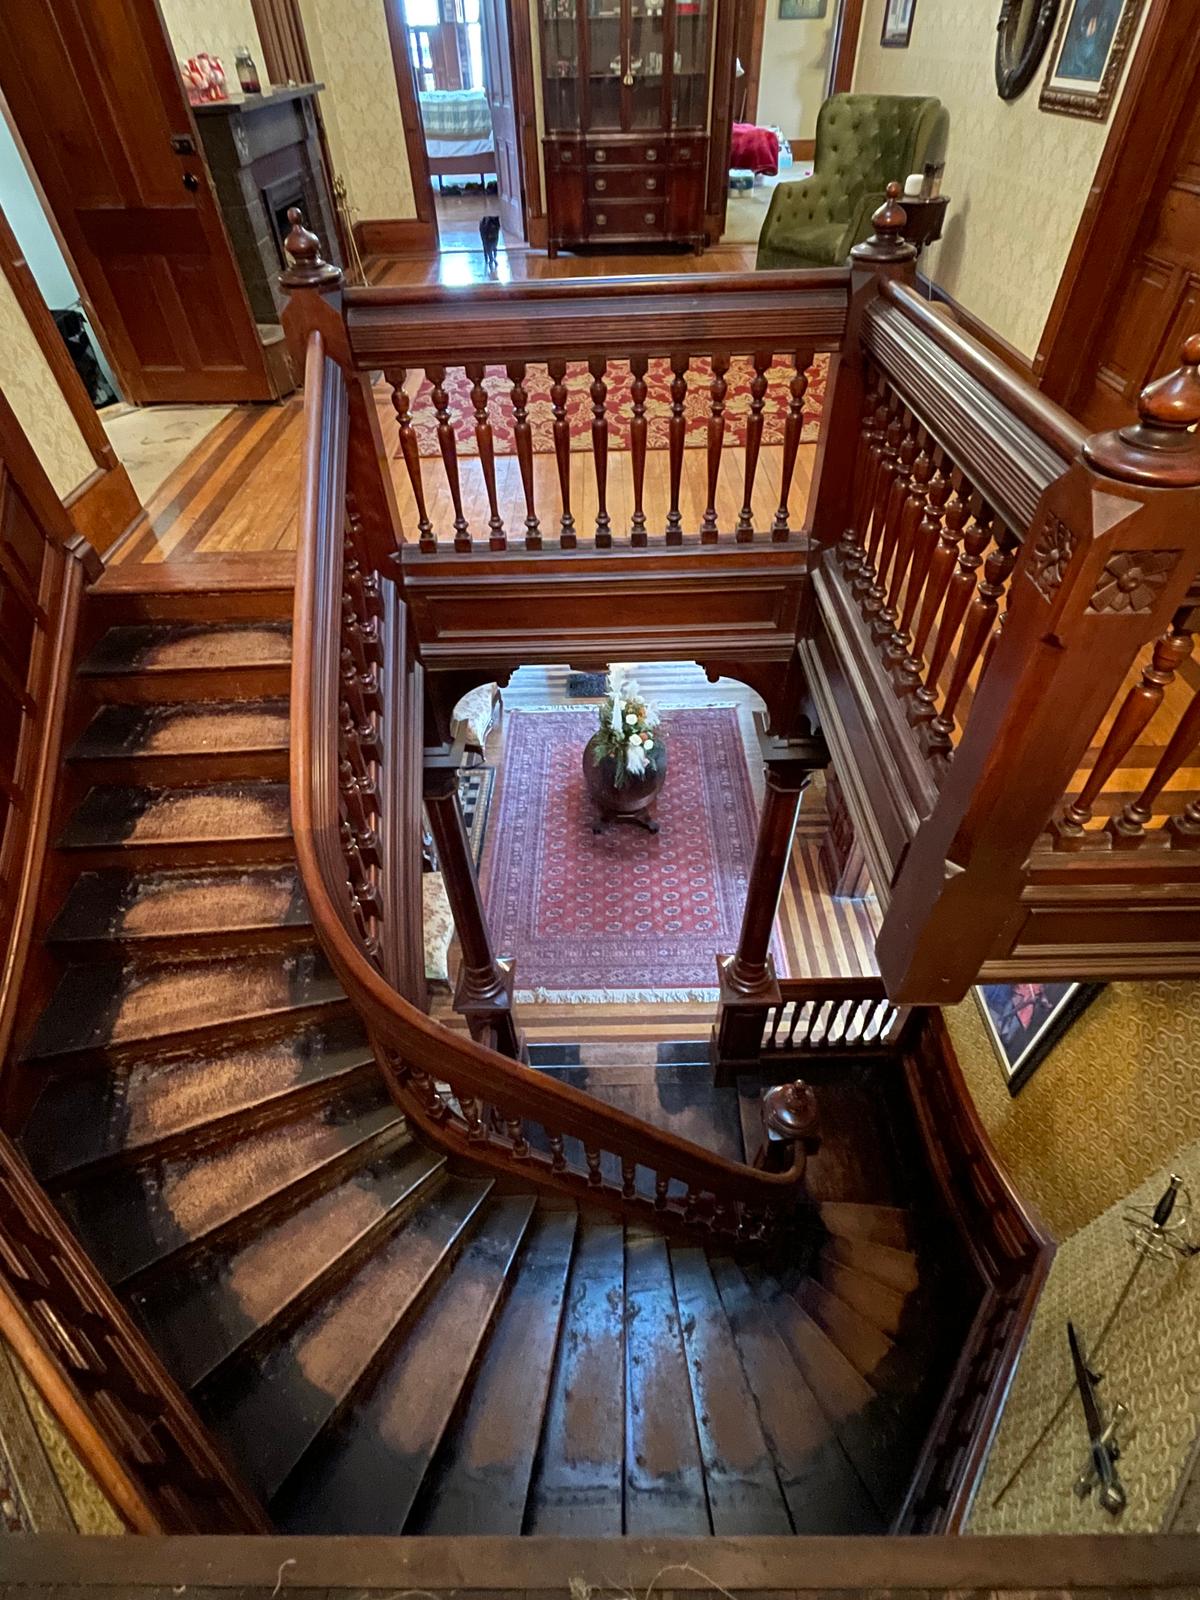 The spiral staircase in the manor adds to its magical qualities. (Courtesy of <a href="https://www.facebook.com/profile.php?id=100076974185503">Krasnesky Manor for Wayward Cats</a>)